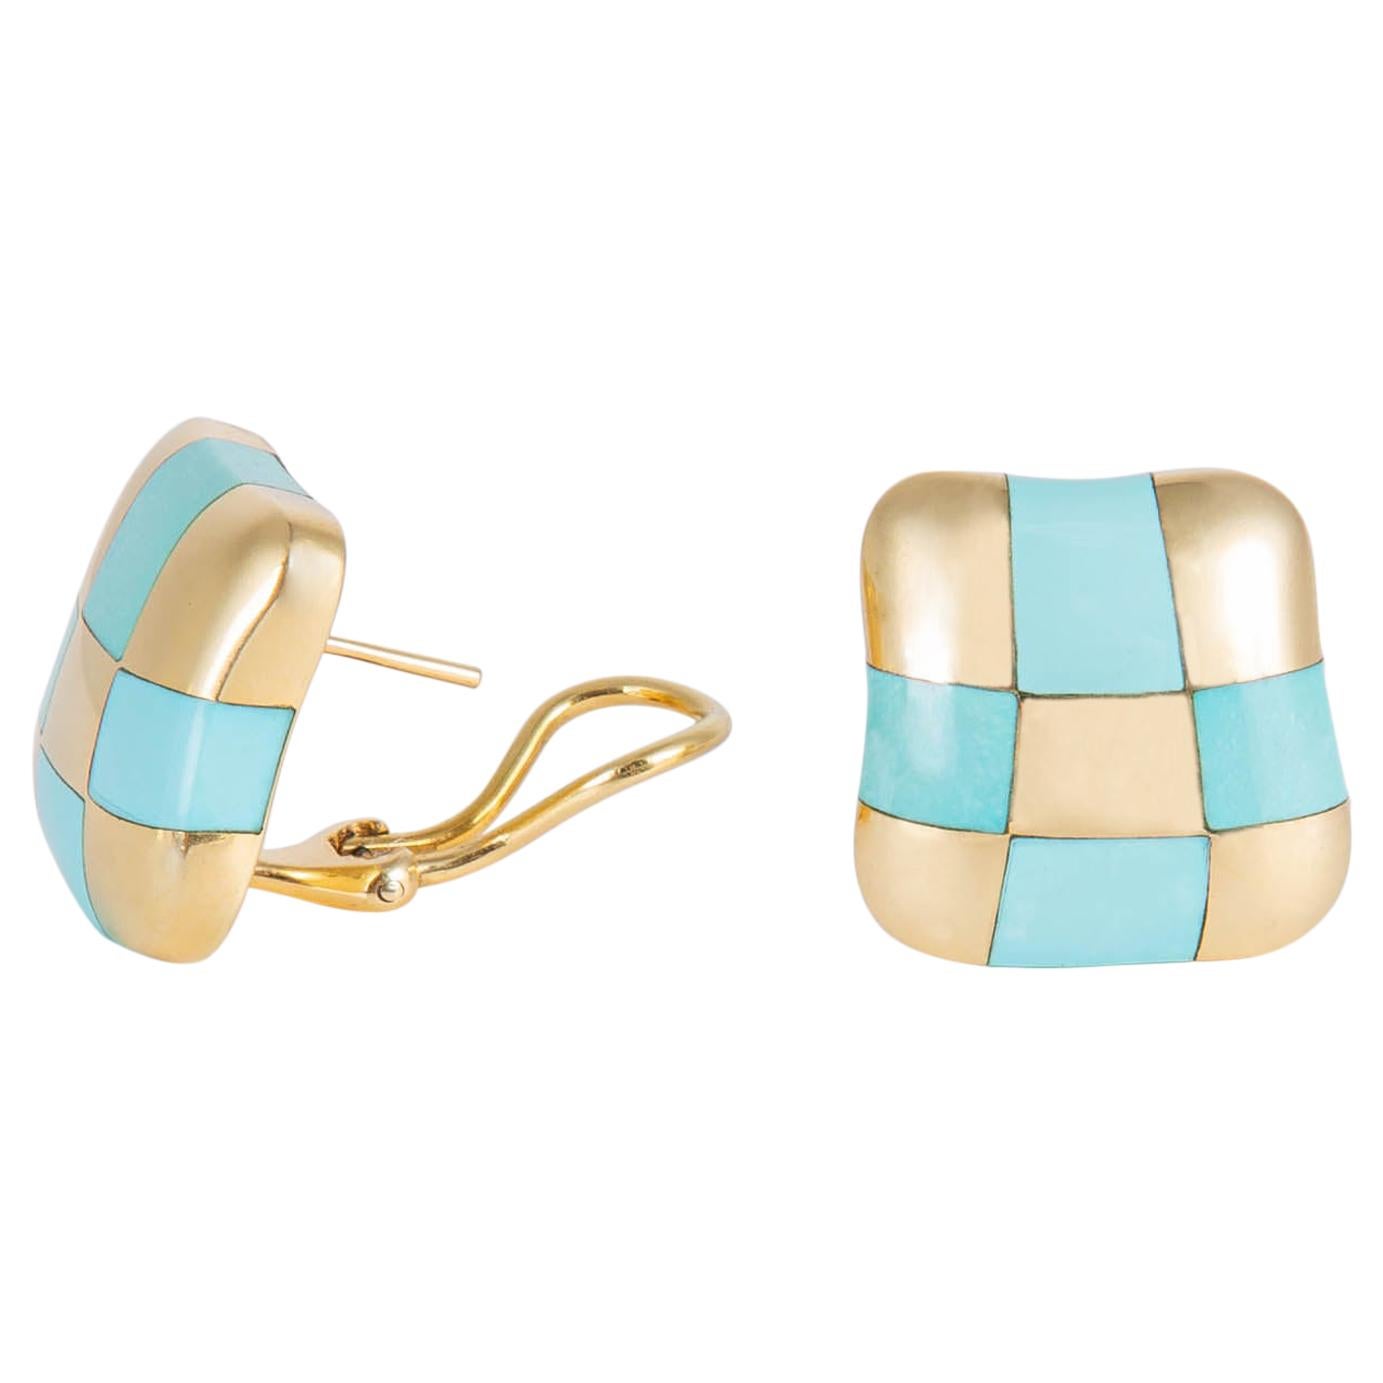 Angela Cummings Turquoise and Gold Checker Board Earrings